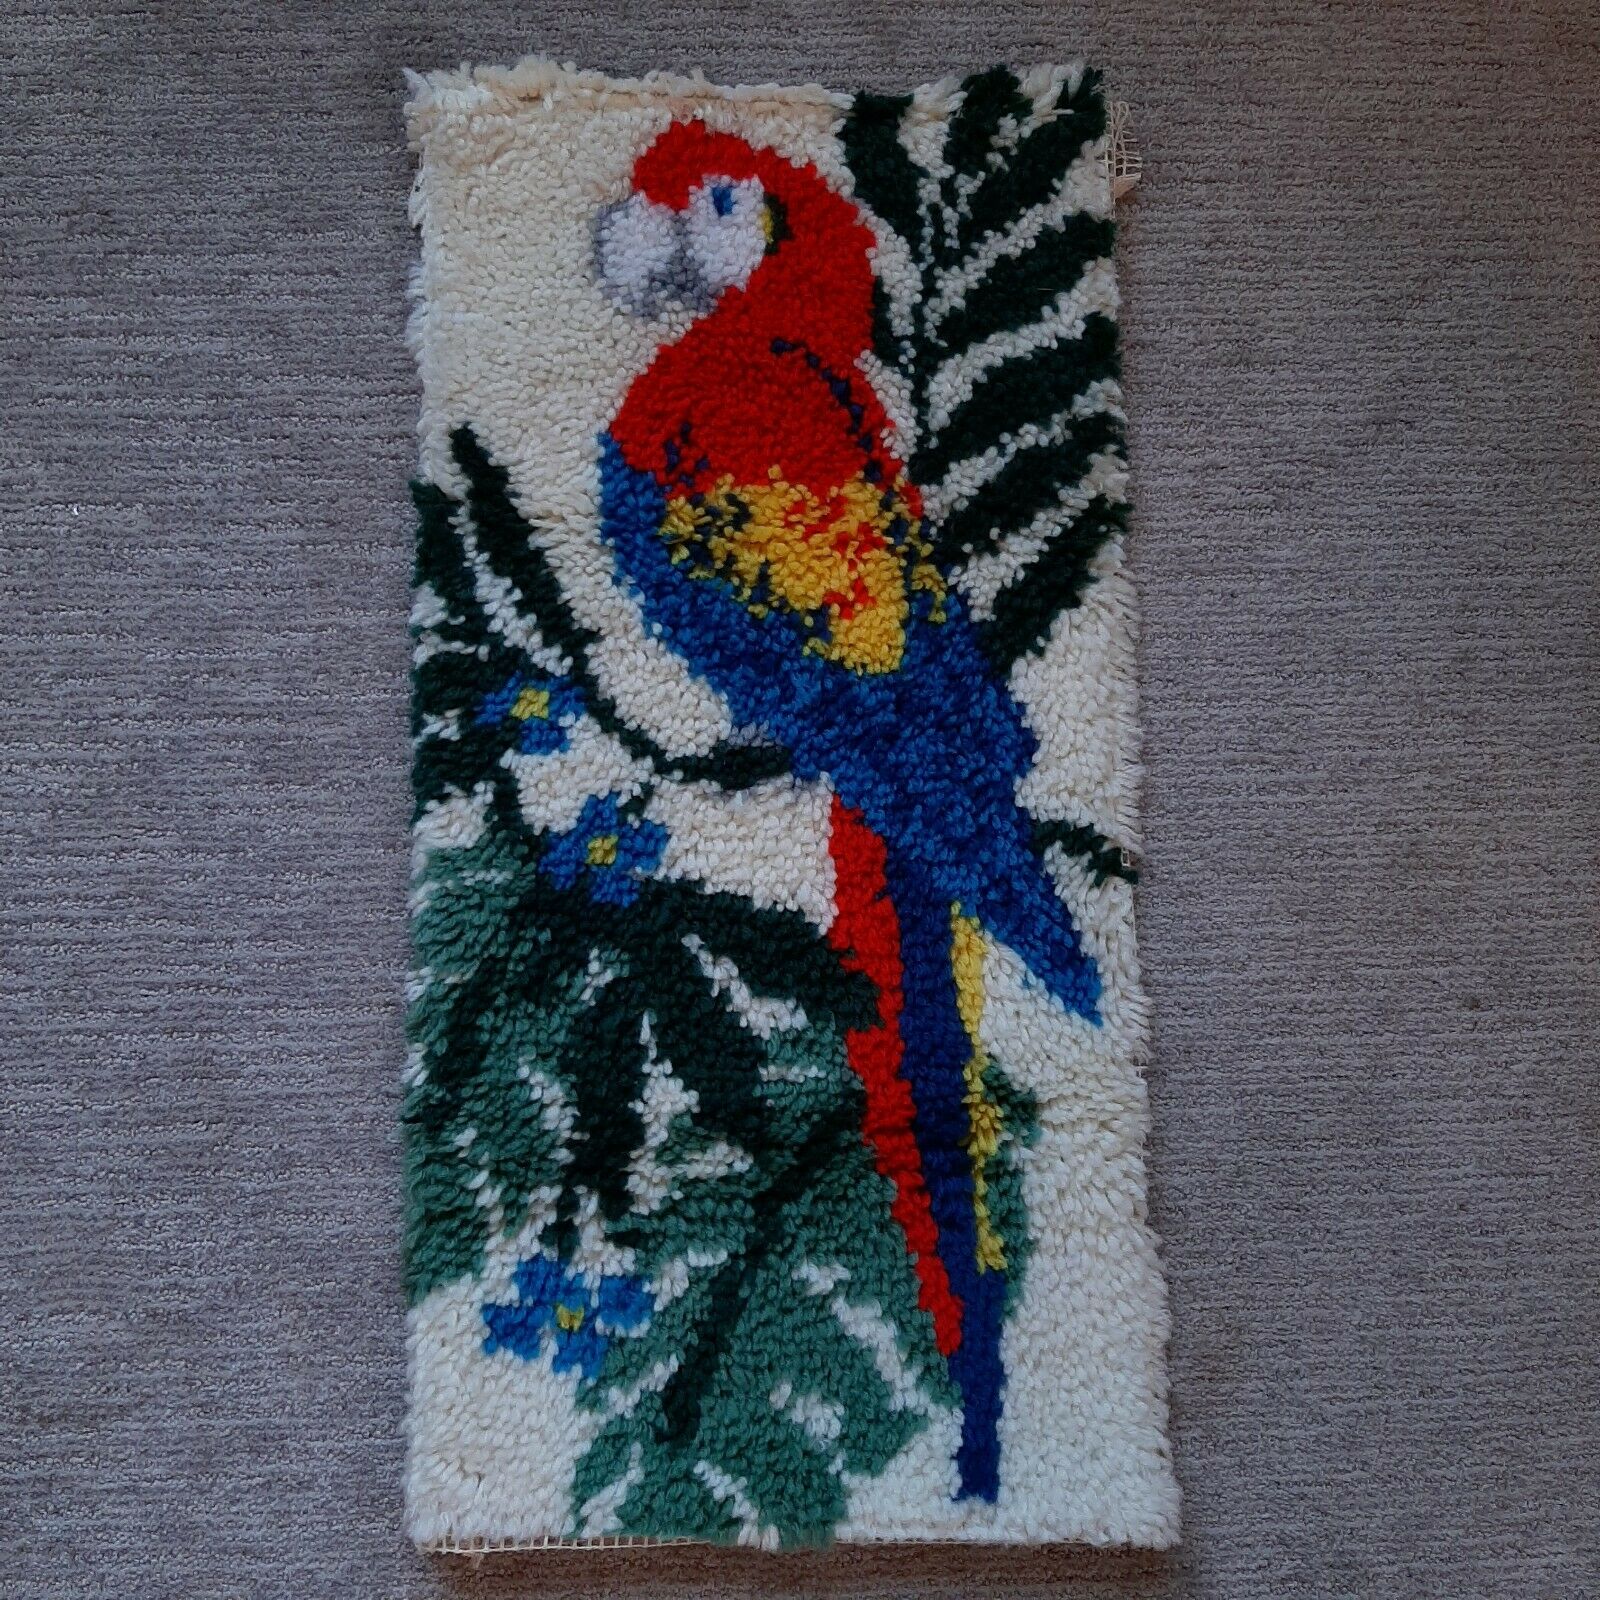 Completed Parrot Latch Hook Rug Wall Hanging 16x32